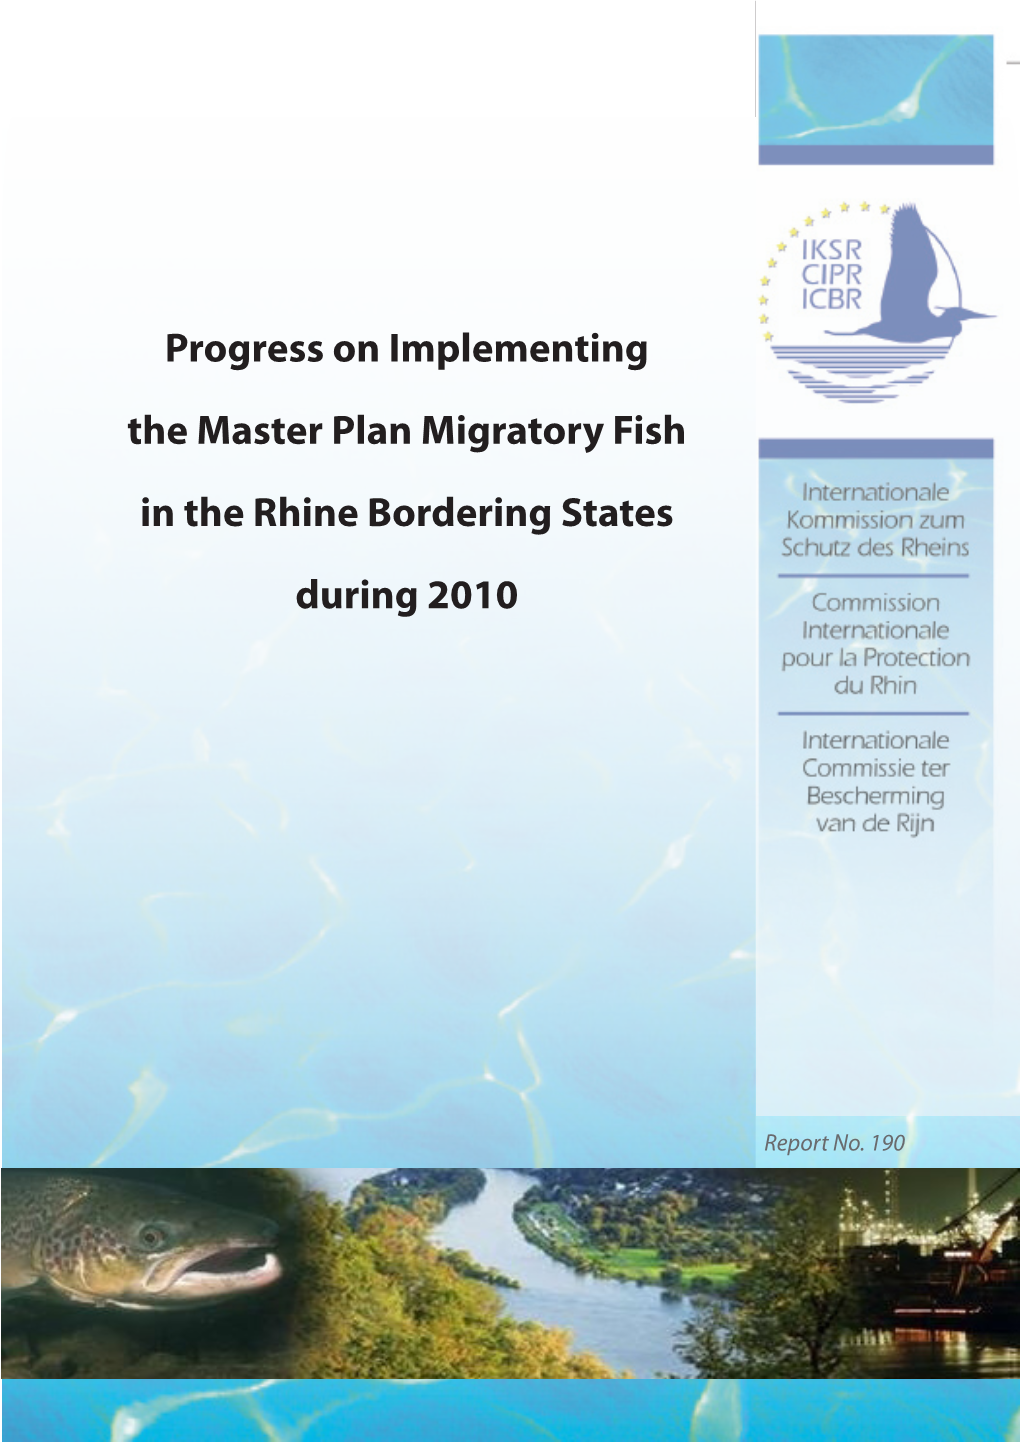 Progress on Implementing the Master Plan Migratory Fish in the Rhine Bordering States During 2010